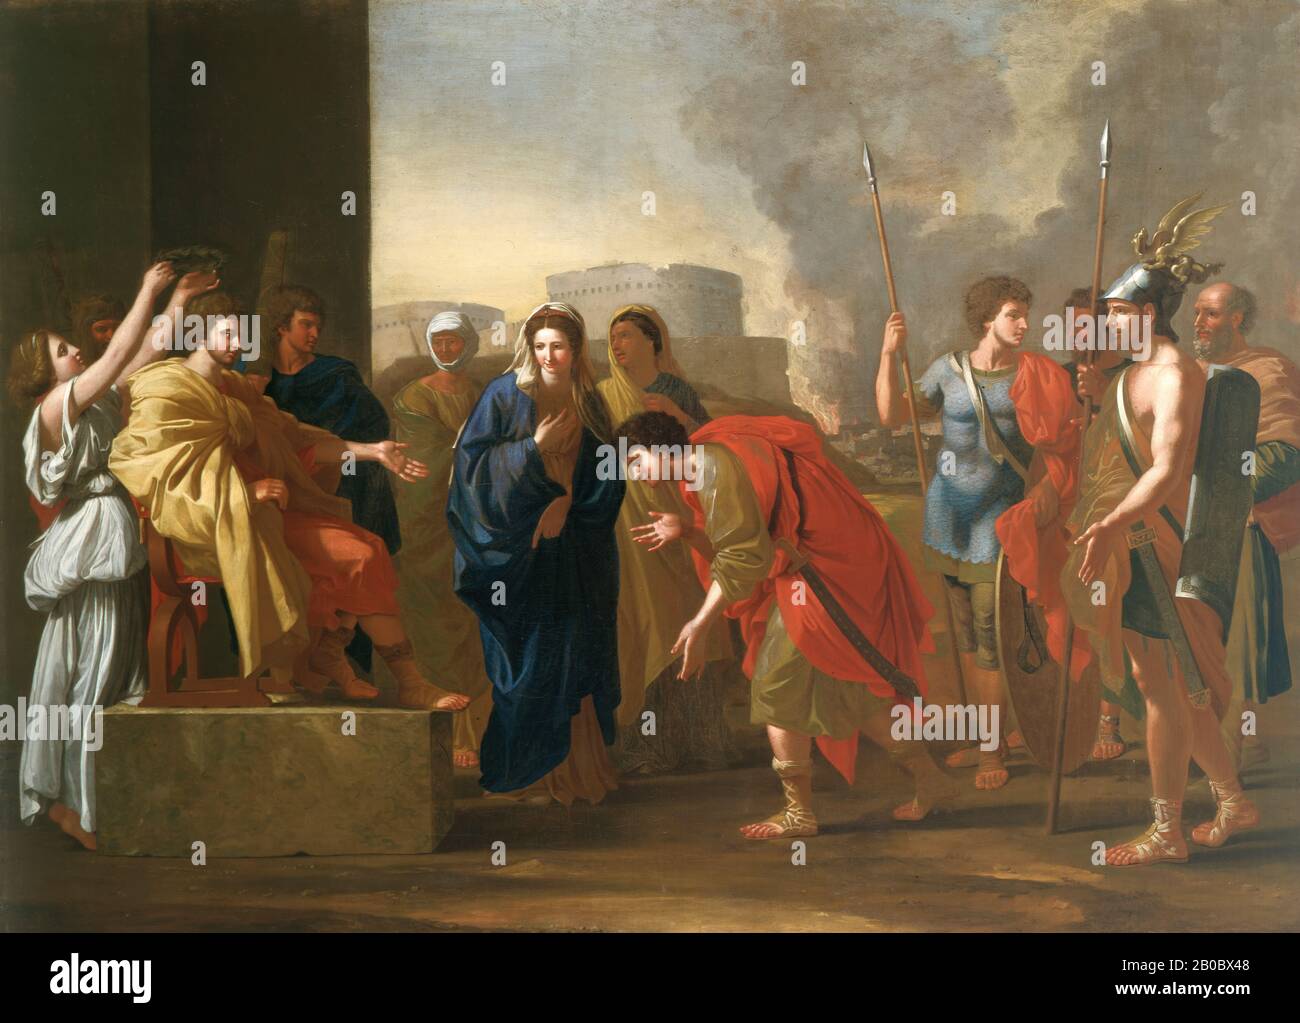 John Smibert, The Continence of Scipio, ca. 1719-1722, oil on canvas, 45 3/4 in. x 62 5/8 in. (116.21 cm x 159.07 cm), Smibert's painting is a copy of a 1640 painting by the revered French painter Nicolas Poussin. Its subject derives from Roman history. During the Second Punic War, the Roman general Publius Cornelius Scipio Africanus decided to return his war spoils, including the bride of his enemy Allucius, the young prince of the Celtiberians. Scipio's moral fortitude presented an ideal subtext for Poussin's classical interpretation. John Smibert, the copyist, was a portrait painter from Sc Stock Photo